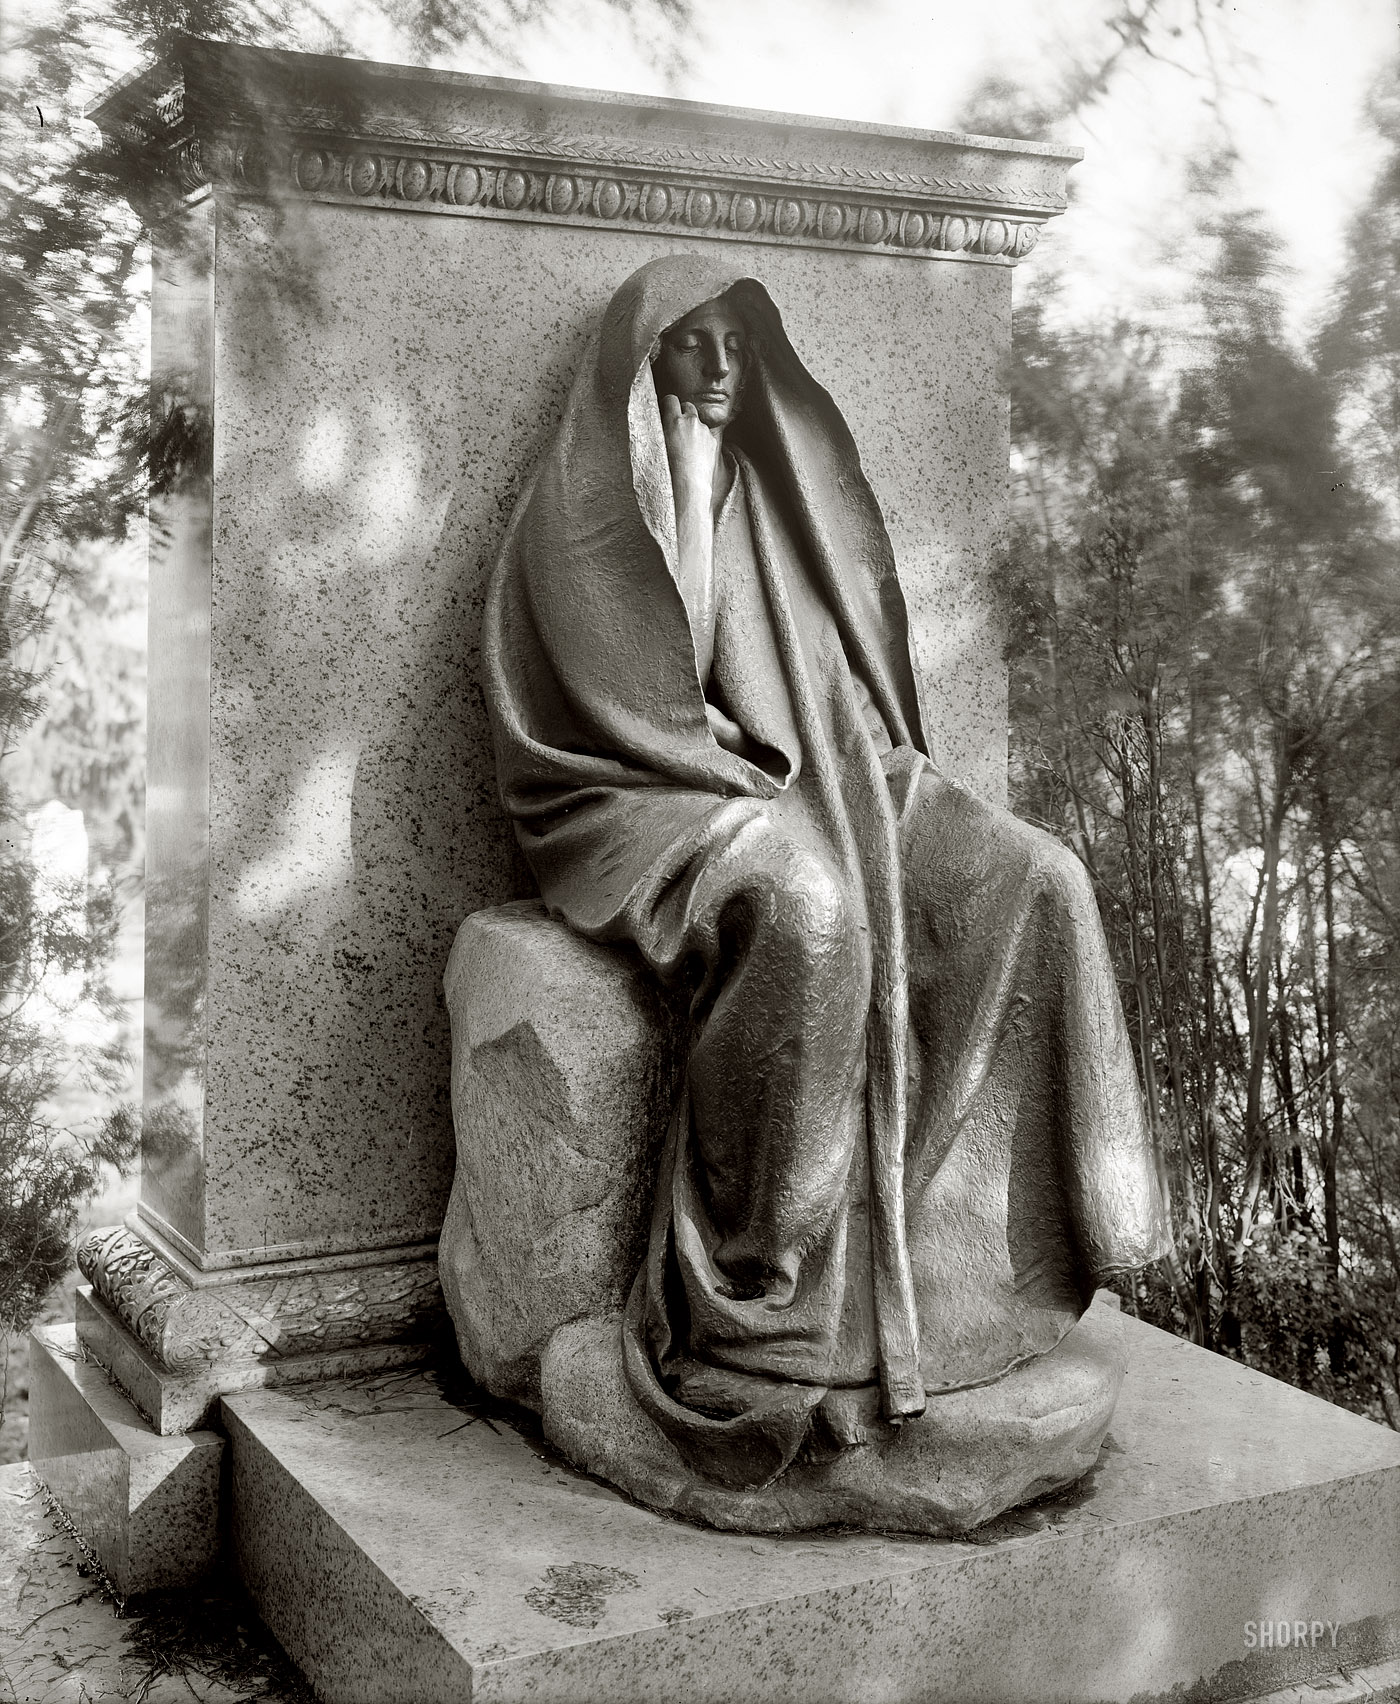 Washington, D.C., circa 1915. "Grief monument, Rock Creek cemetery." Augustus Saint-Gaudens's ambiguously enigmatic bronze memorializing Clover Adams, the society hostess whose suicide led to its commission by her husband, the writer Henry Adams. National Photo Co. Collection glass negative. View full size.